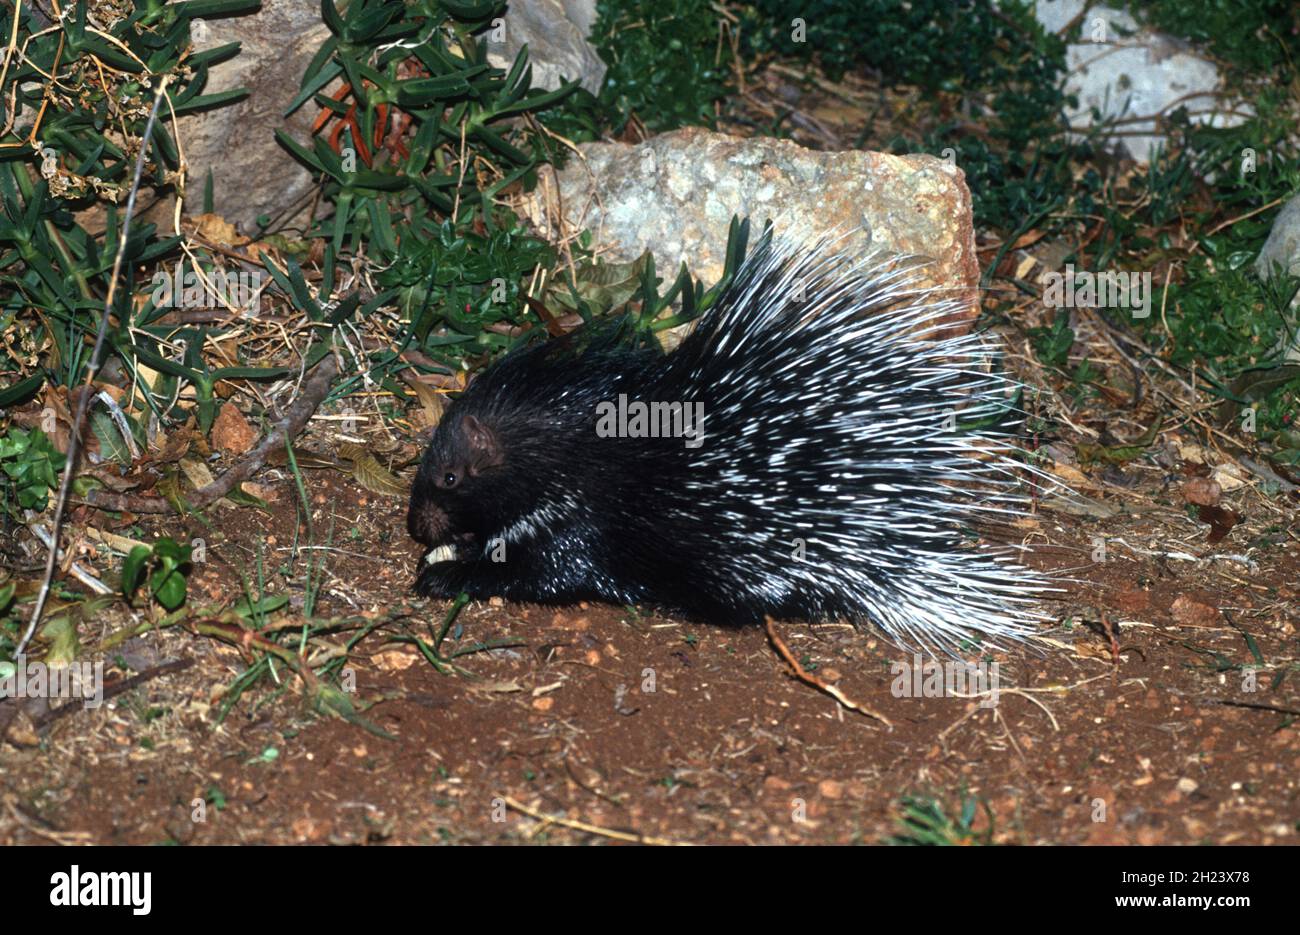 Indian Crested Porcupine (Hystrix indica), or Indian Porcupine is quite an adaptable rodent, found throughout southern Asia and the Middle East. It is Stock Photo